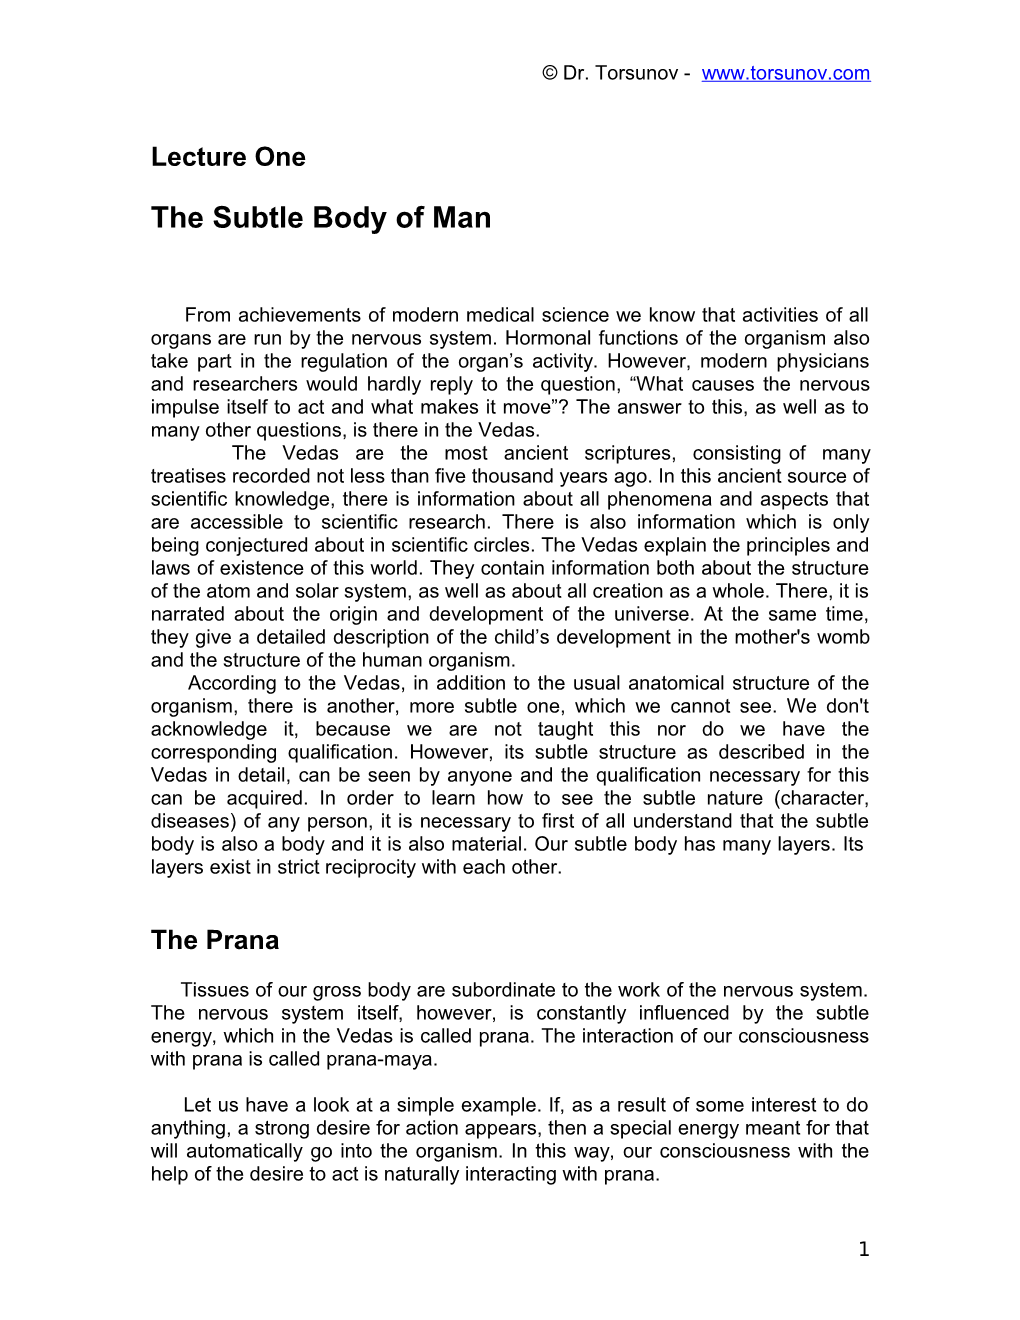 The Subtle Body of Man